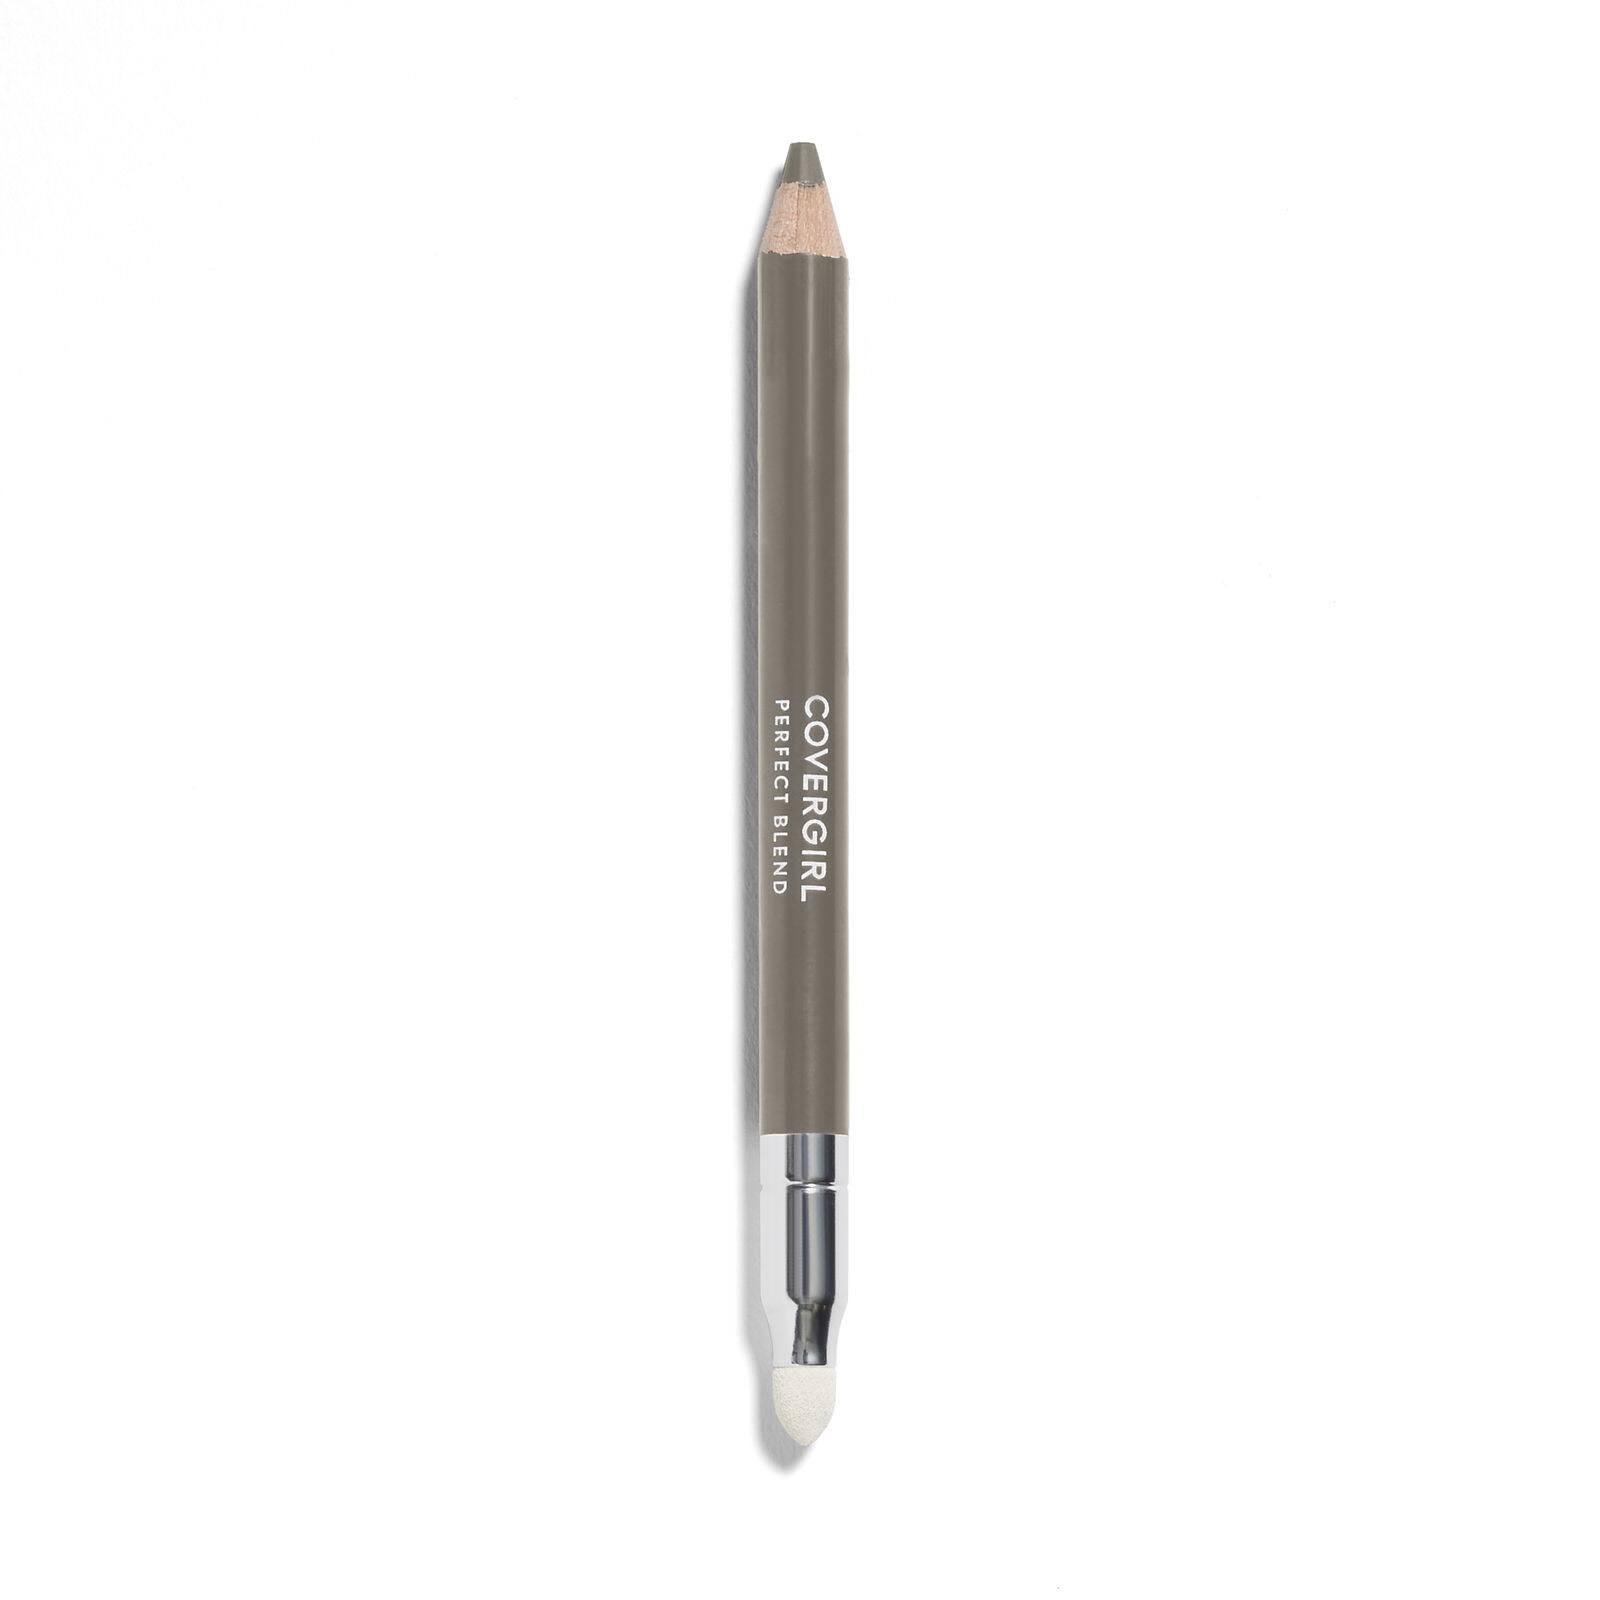 Covergirl Perfect Blend Eye Pencil - 130 Smoky Taupe